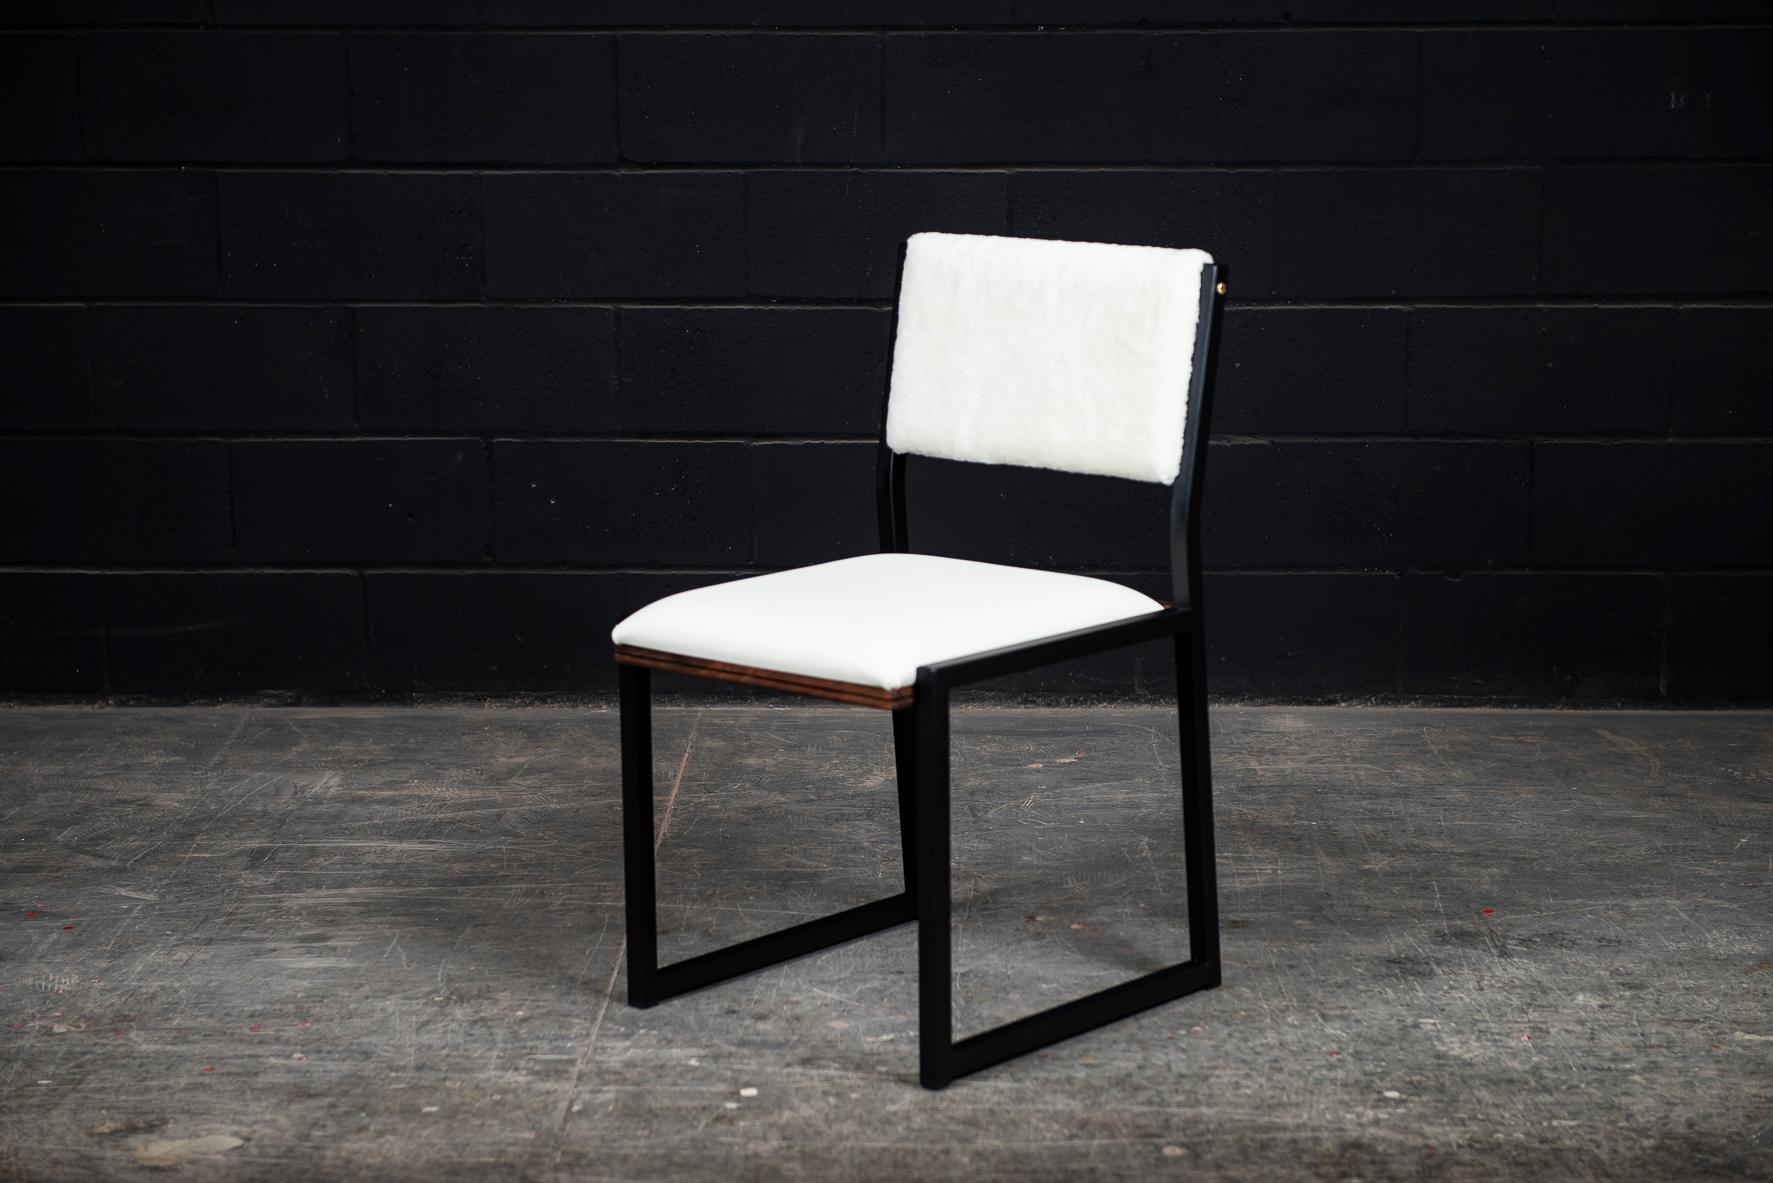 Canadian Shaker Modern Chair by Ambrozia, Walnut, Black Steel, Leather and Shearling For Sale